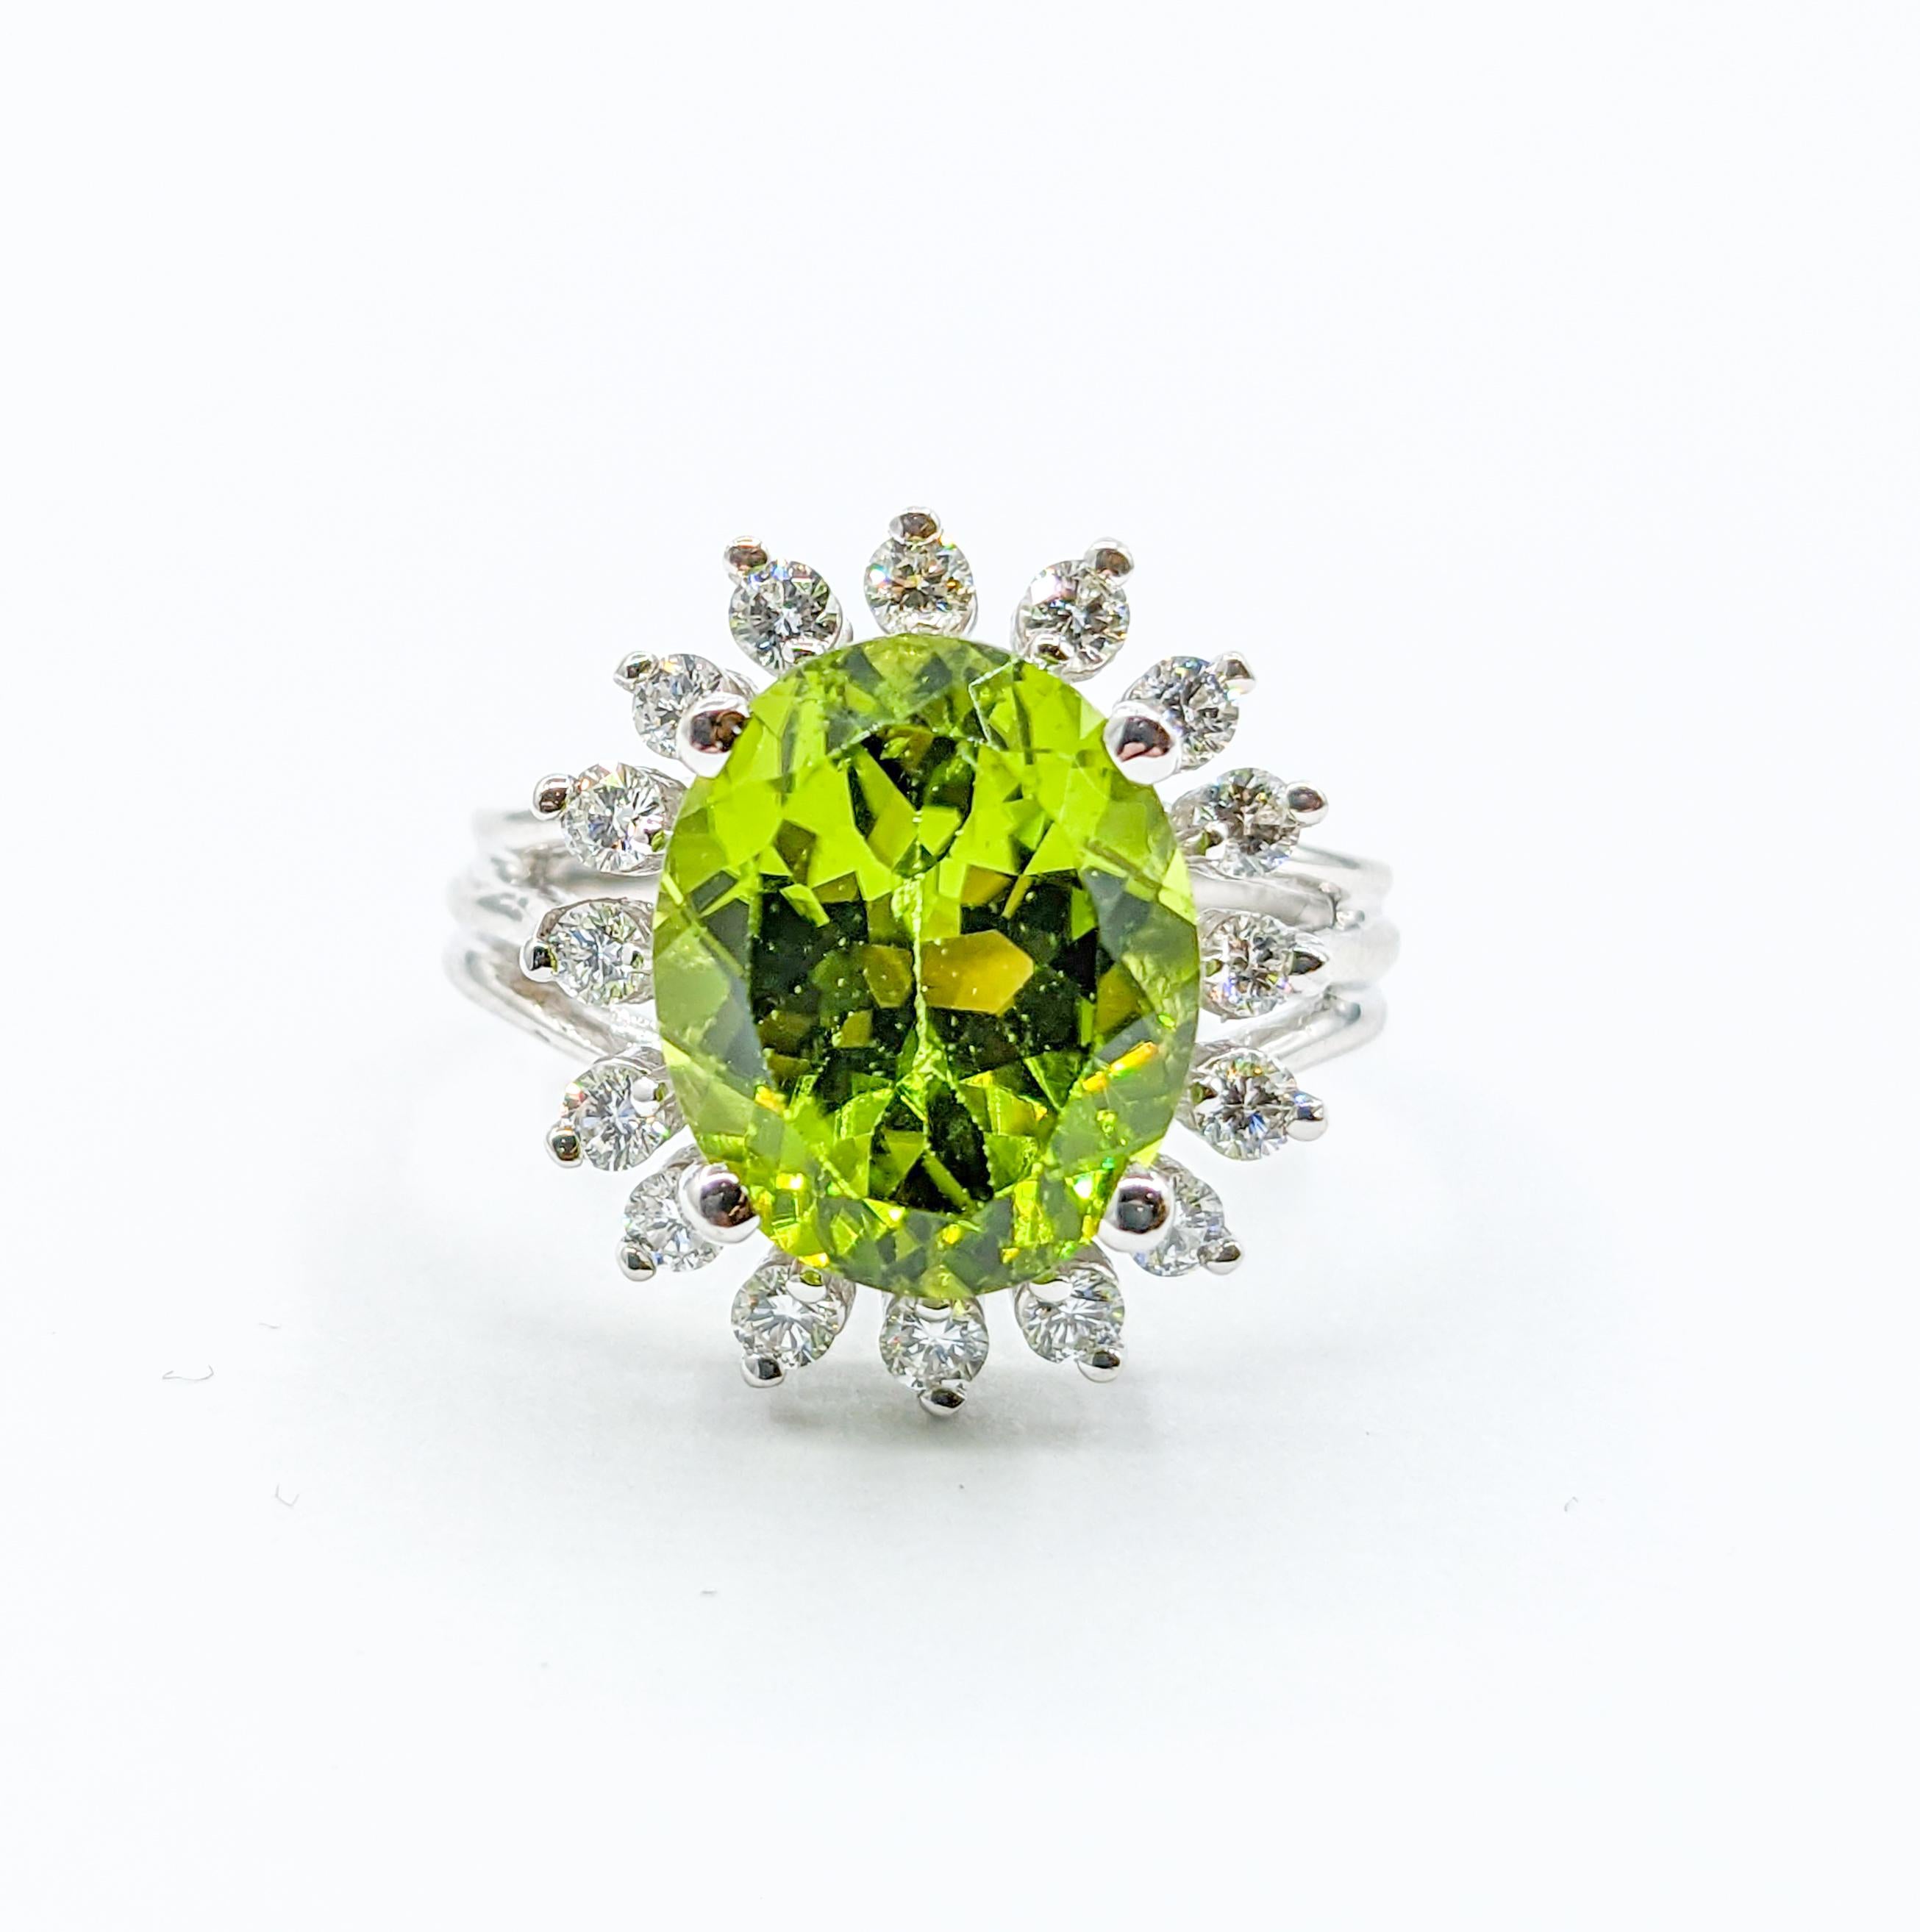 5ct Peridot & Diamond Halo Cocktail Ring For Sale 4